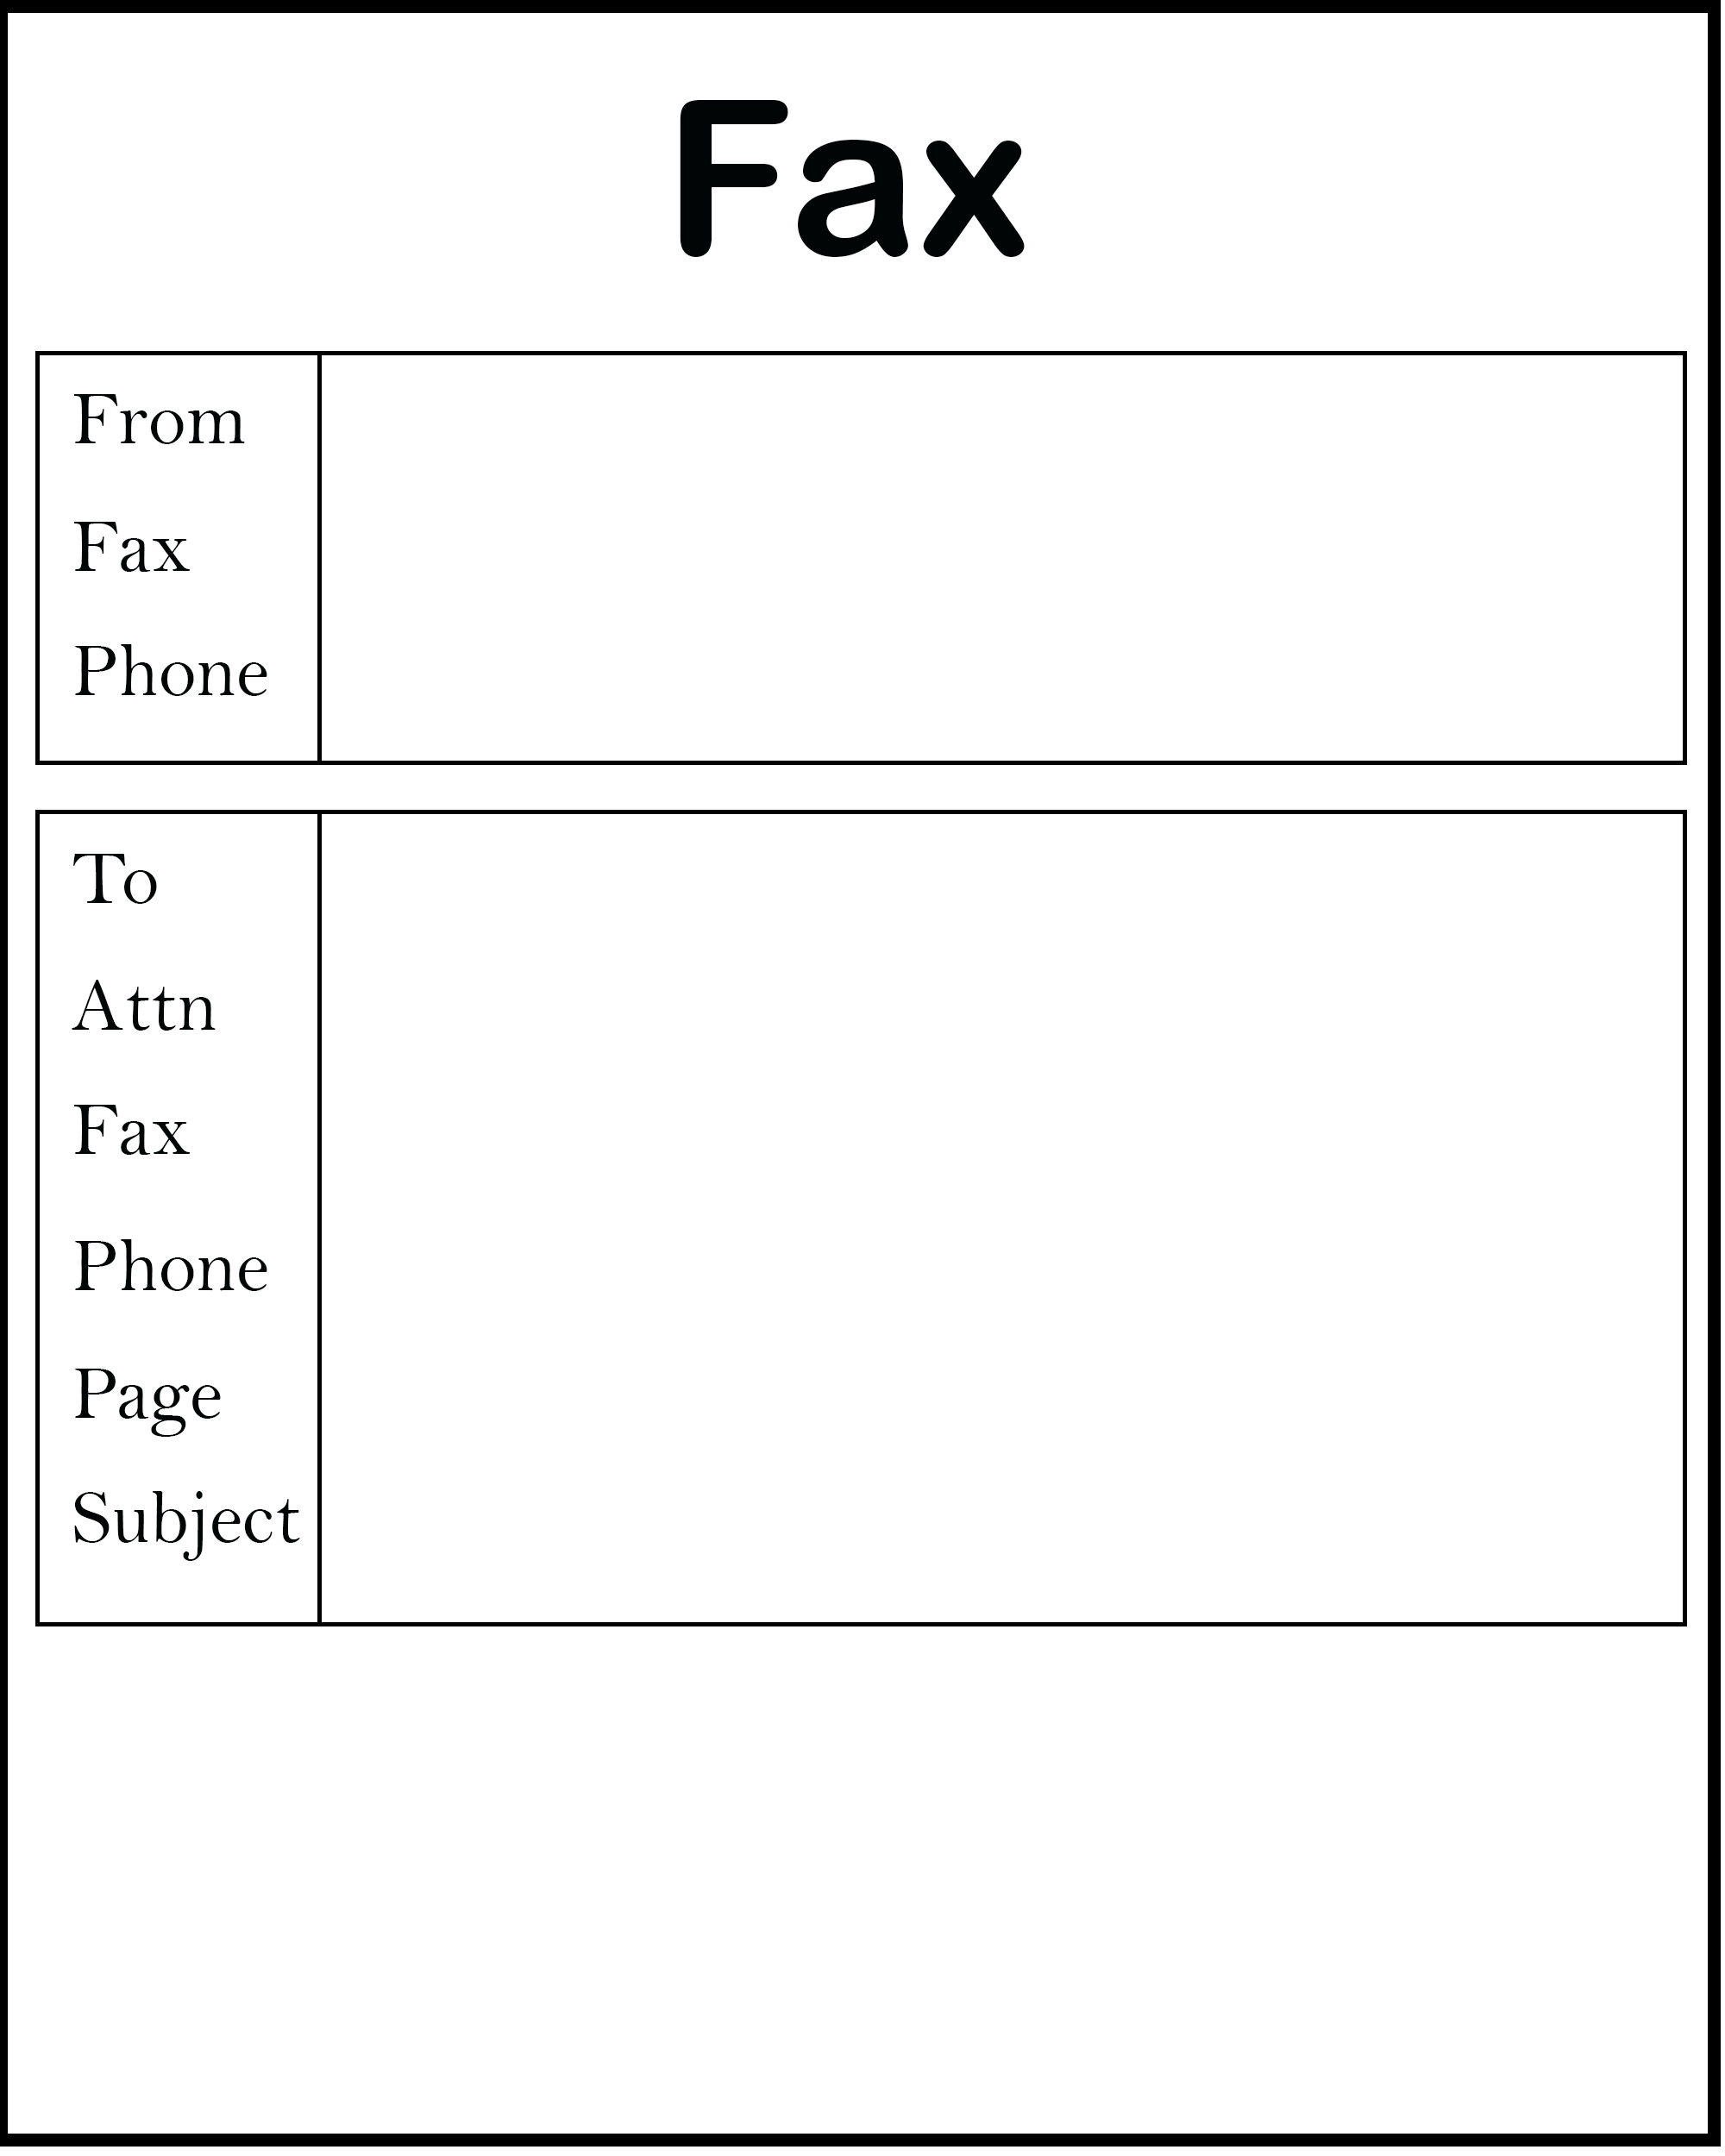 Fax Sample Master Template